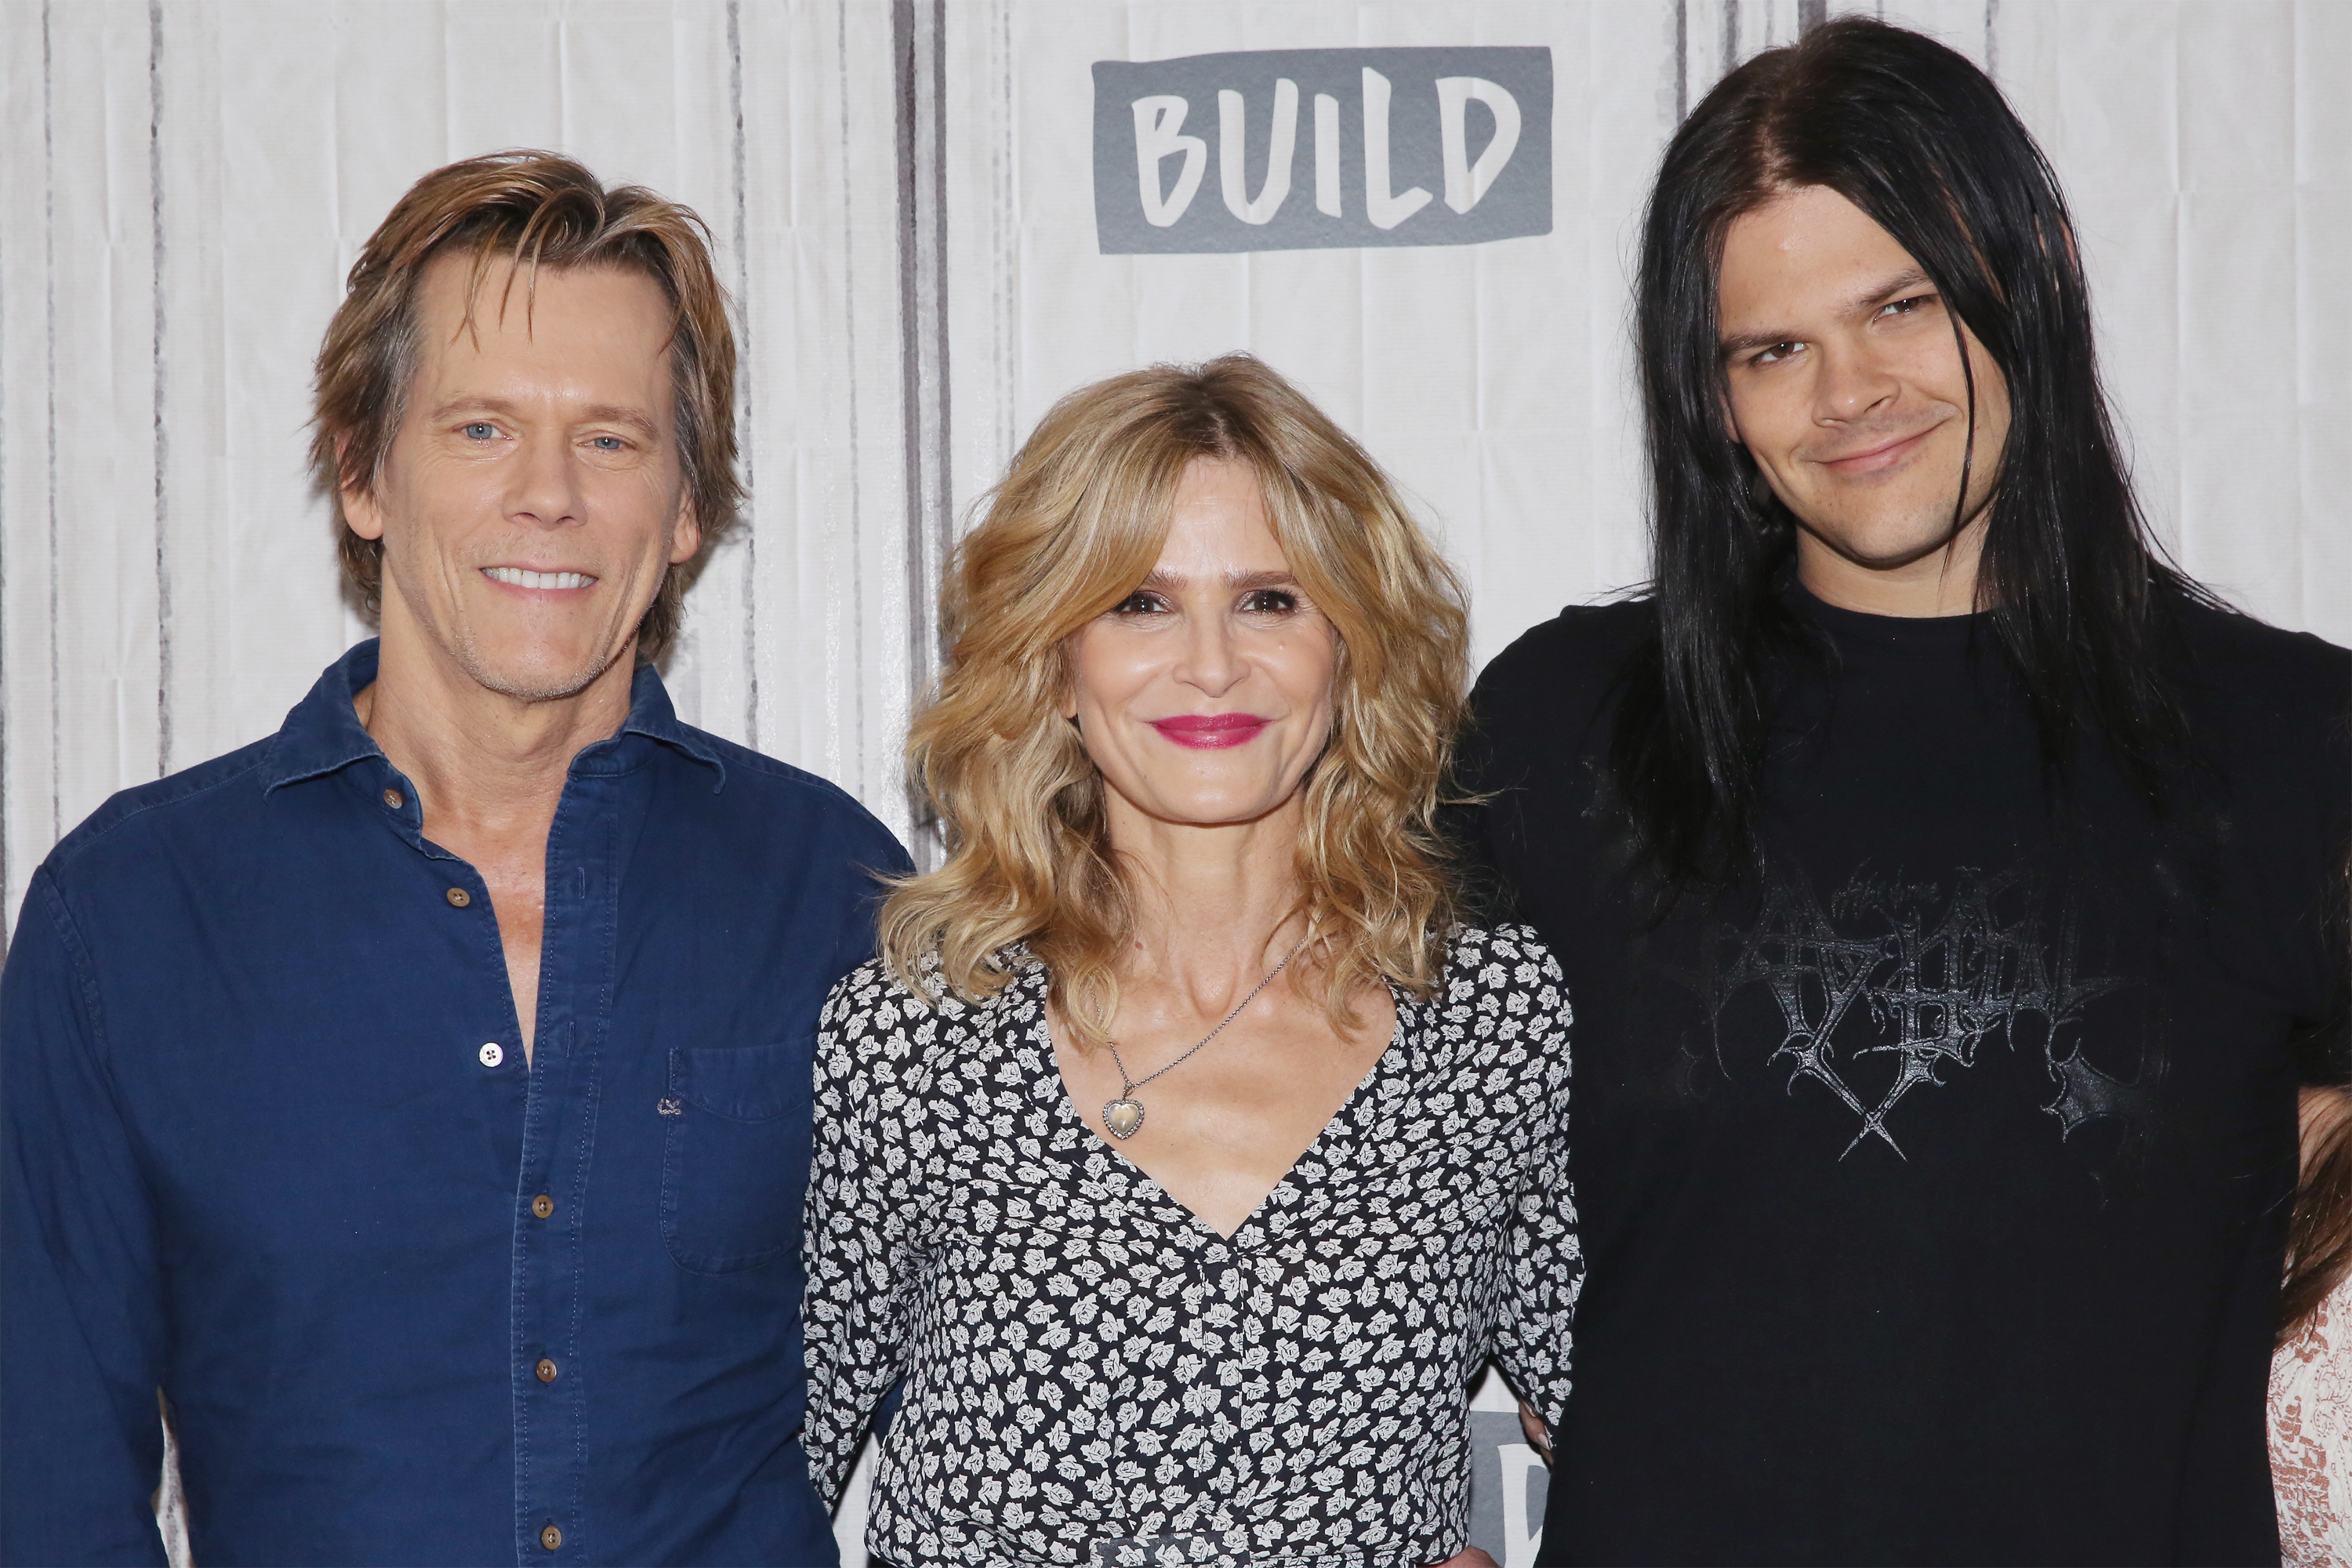 Kevin Bacon, Kyra Sedgwick, and Travis Bacon visit Build to discuss the film "Story of a Girl" on July 21, 2017, in New York City | Source: Getty Images